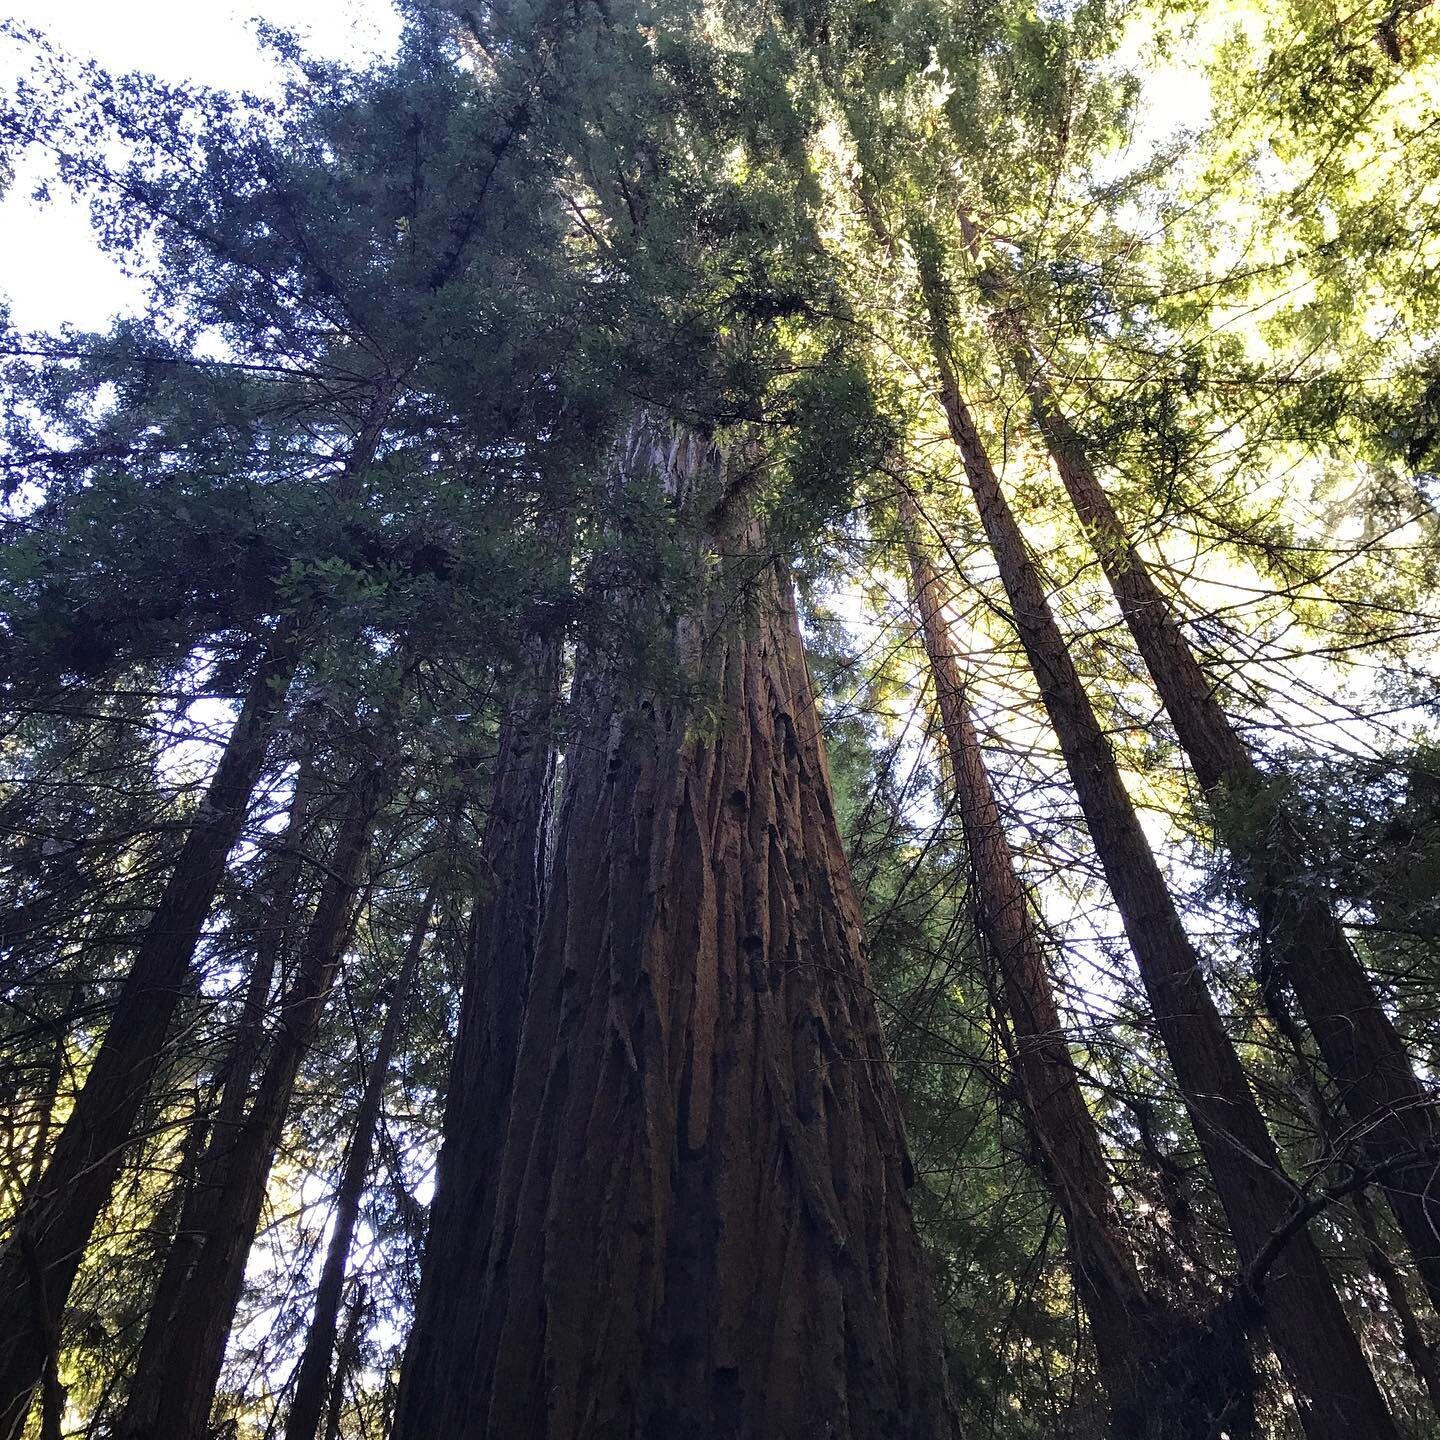 In 1991, the 1,600 year old Dyerville Tree in Humboldt county fell in a storm. The loss of surrounding trees had changed and increased wind flow. Help us protect the 2,000 year old Clar Tree in Sonoma from a similar fate. Stop the logging in Guernevi